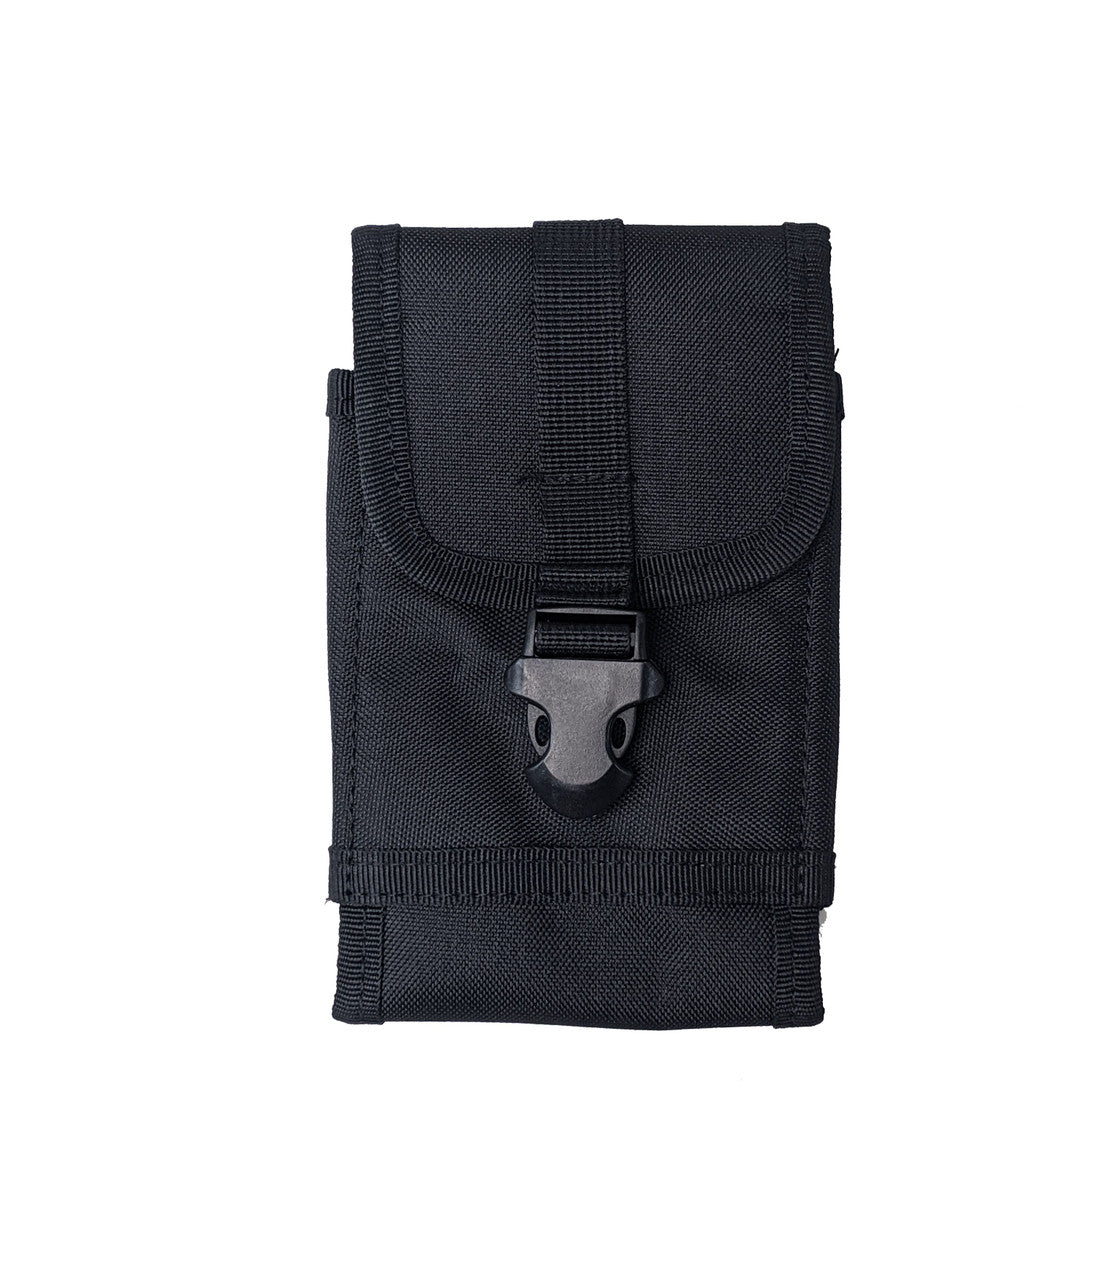 TIC Smart Phone Pouch